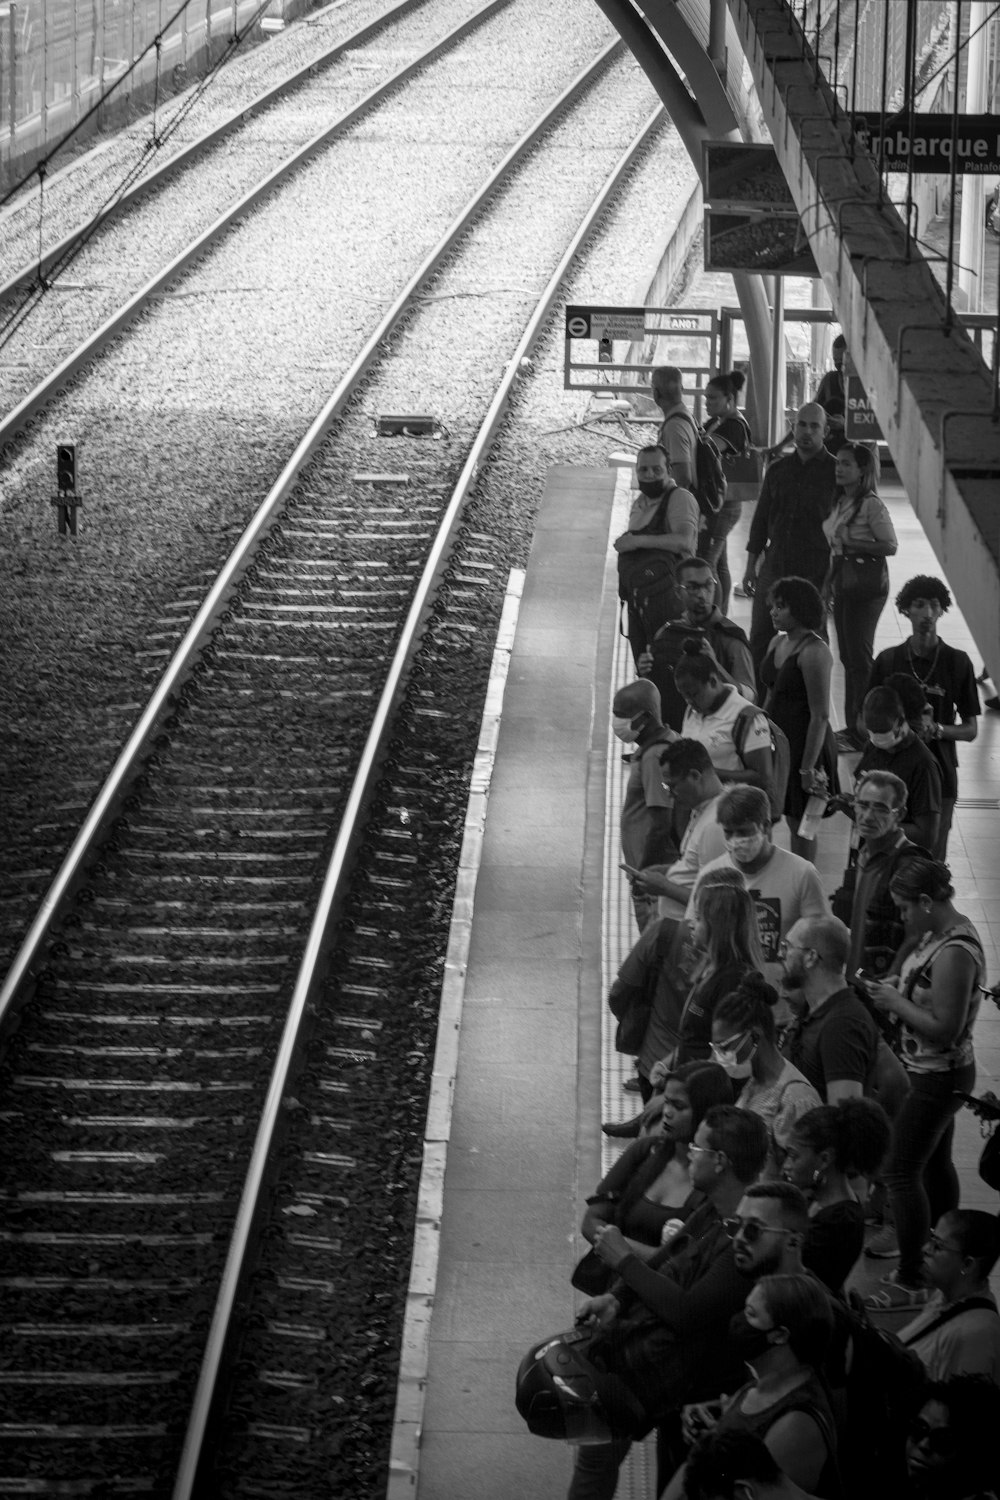 a group of people waiting at a train station